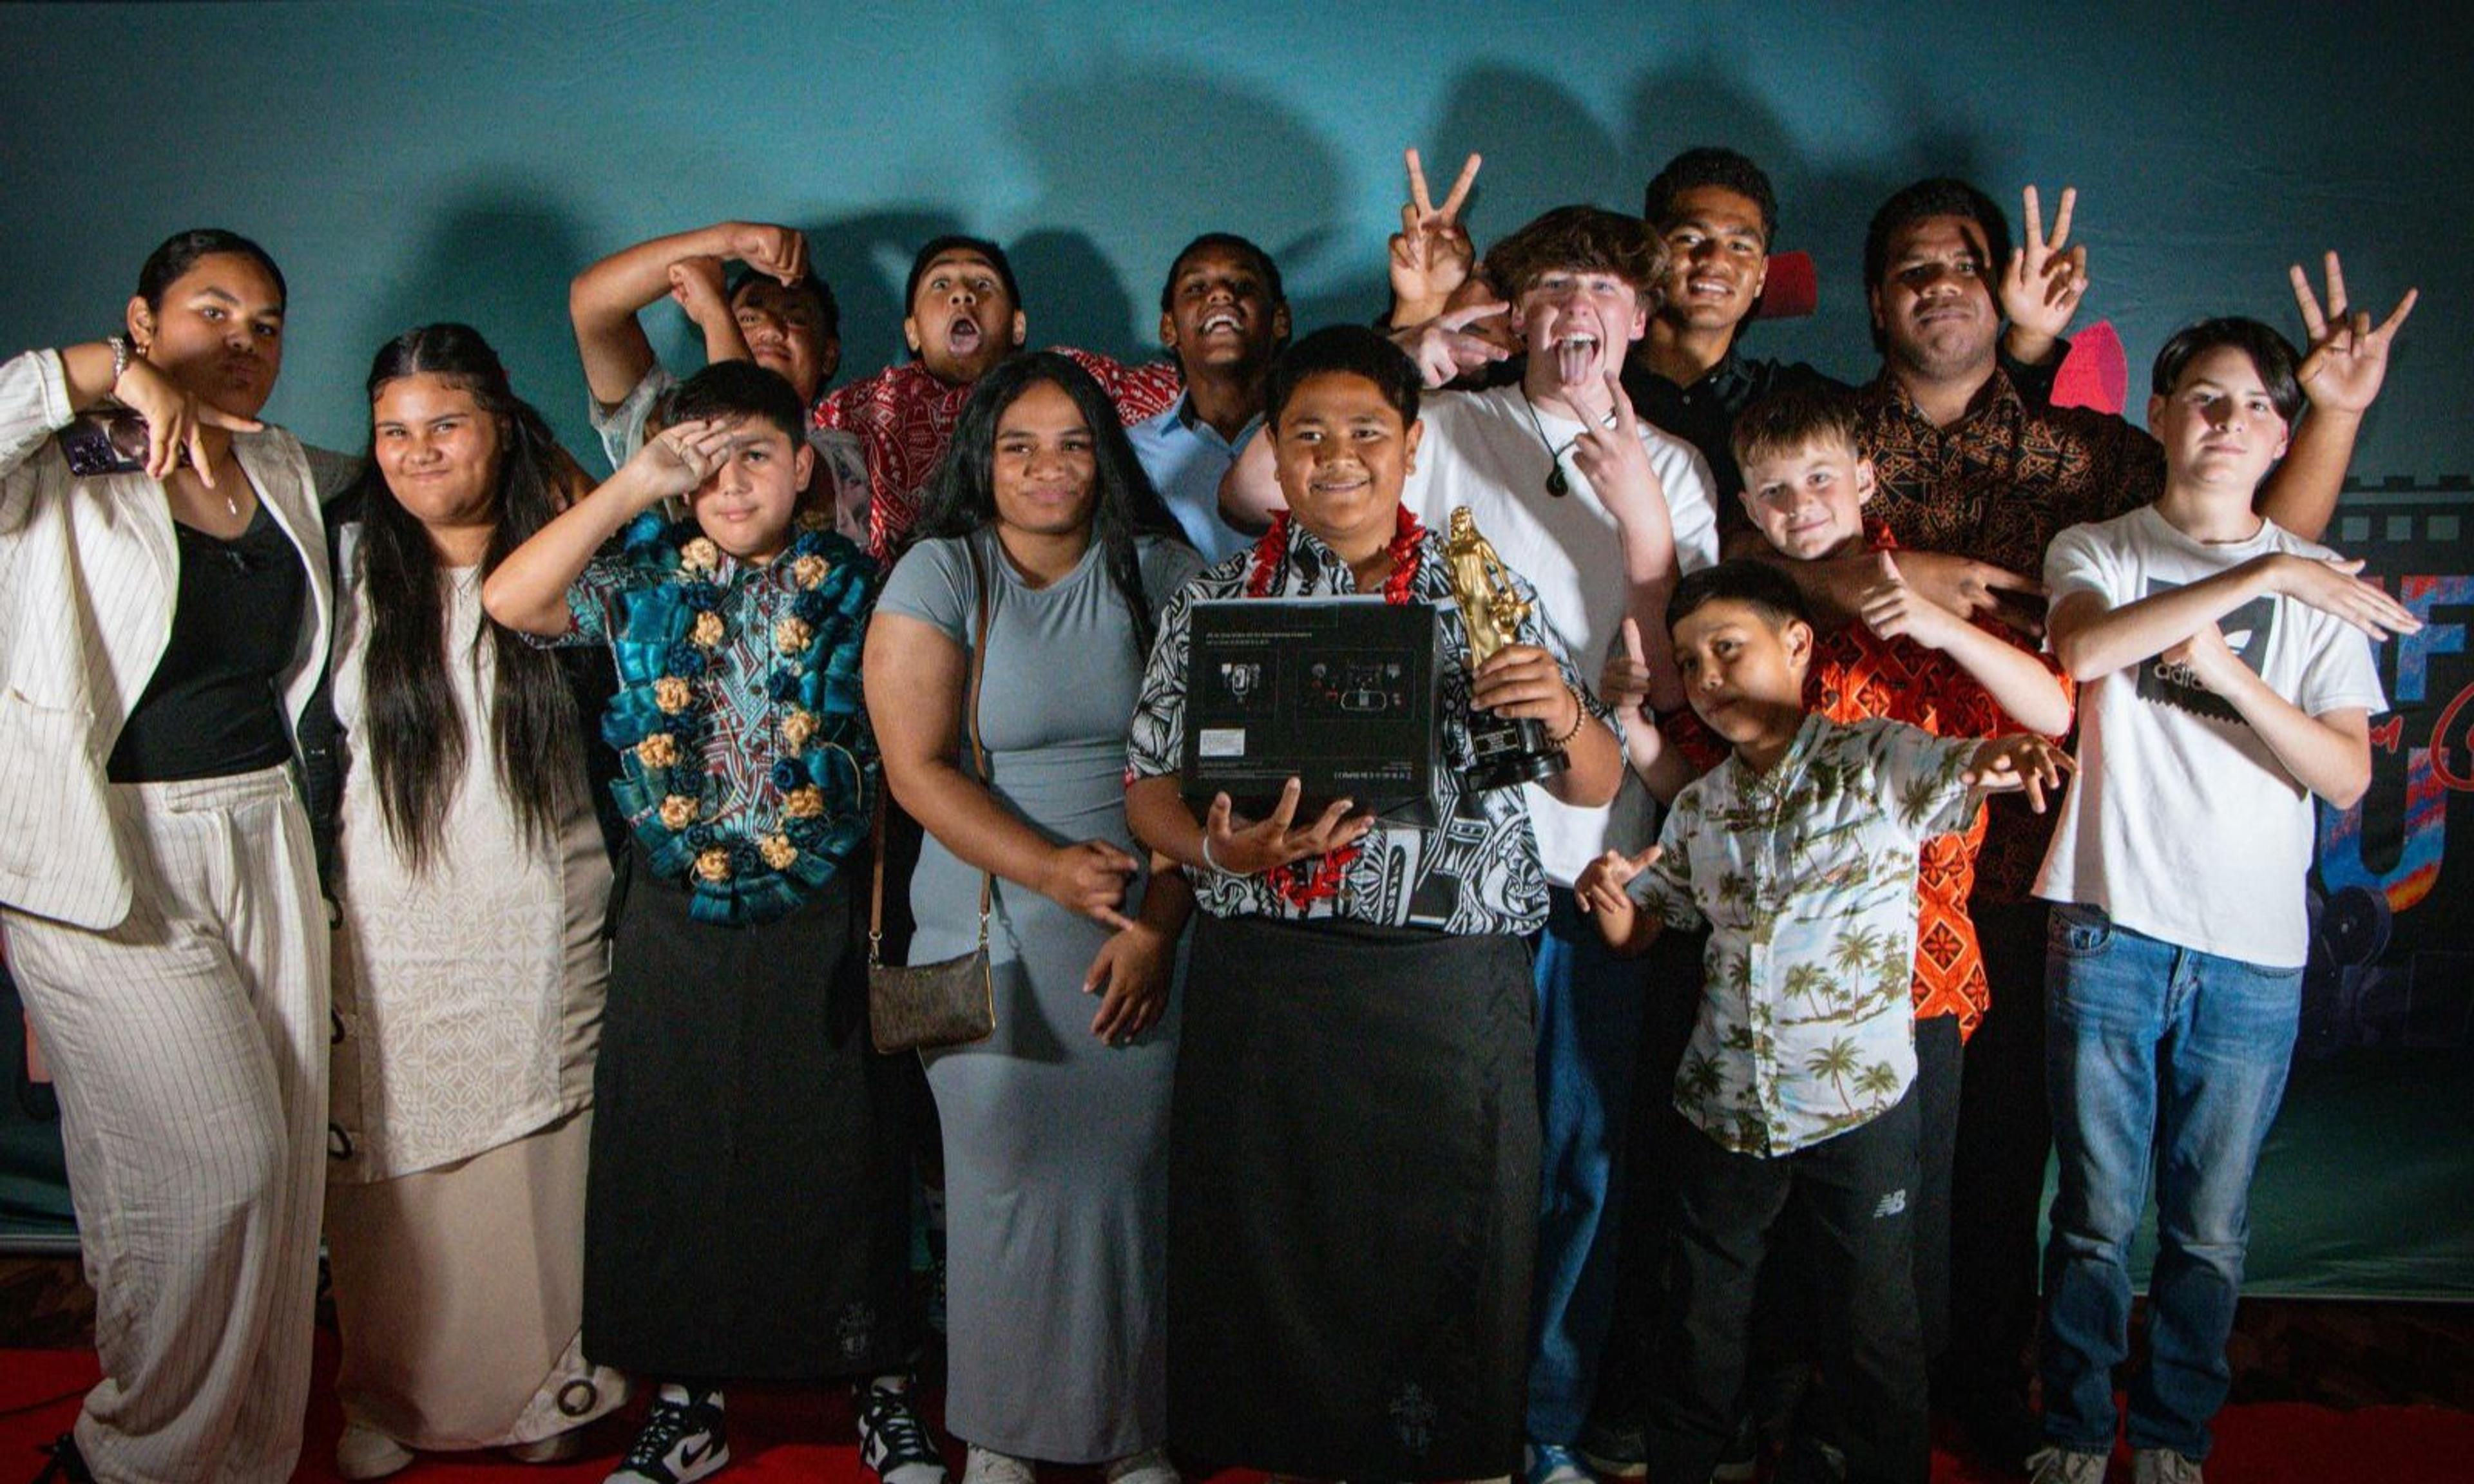 The Pasifika Youth Short Film Competition held its first ever Alofa Awards recognising aspiring filmmakers from Wellington schools. (Pictured) "Viliame" Writer/Director Tomás Satyanand (blue lei) & Best Actor winner Tautiaga Fepulea'i with students from Scots College.